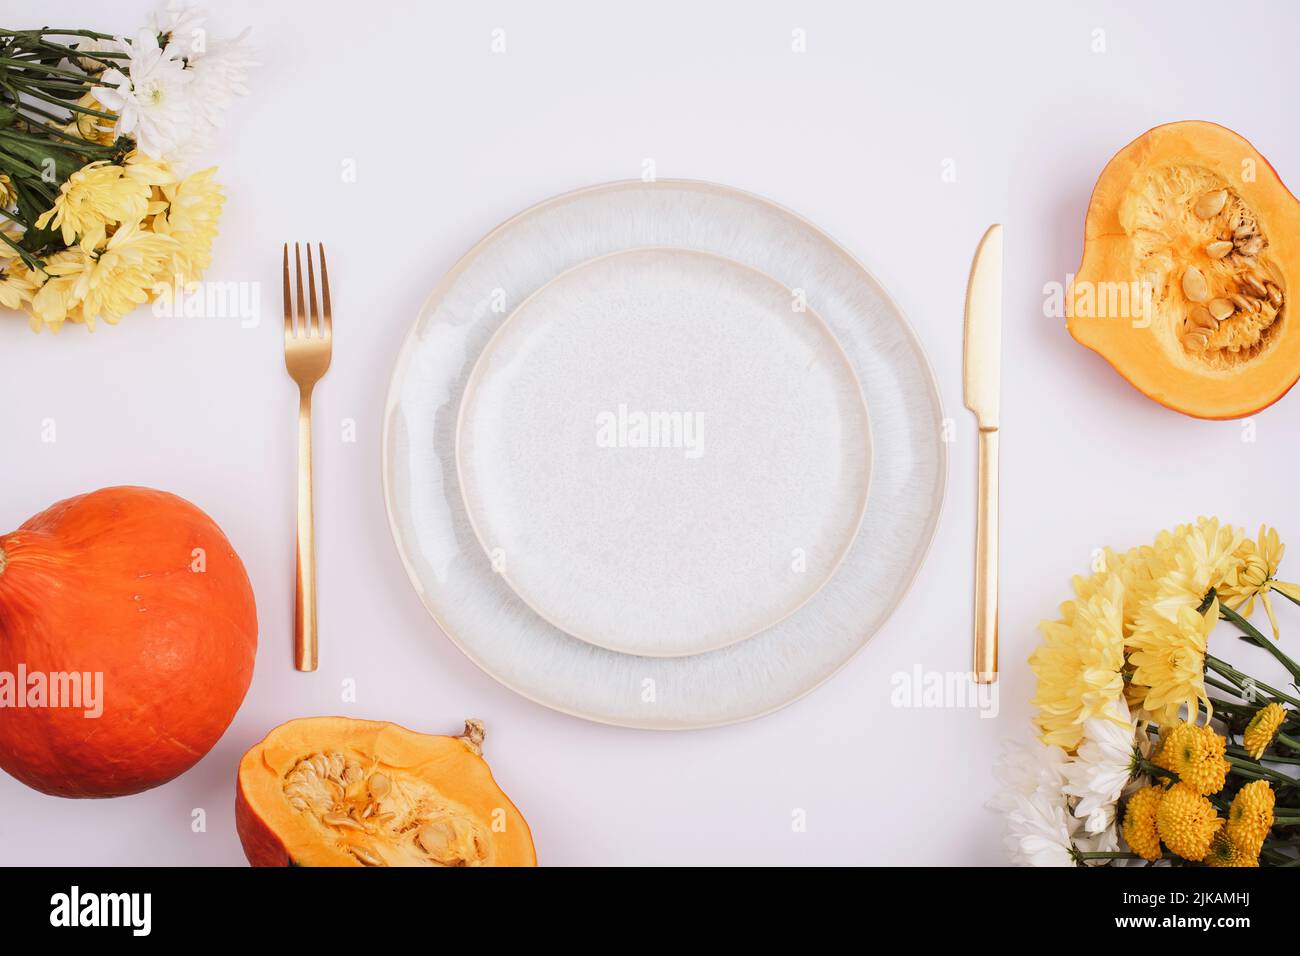 Stylish table setting, yellow dahlia flowers, pumpkins and plate on white table. Top view, flat lay Stock Photo